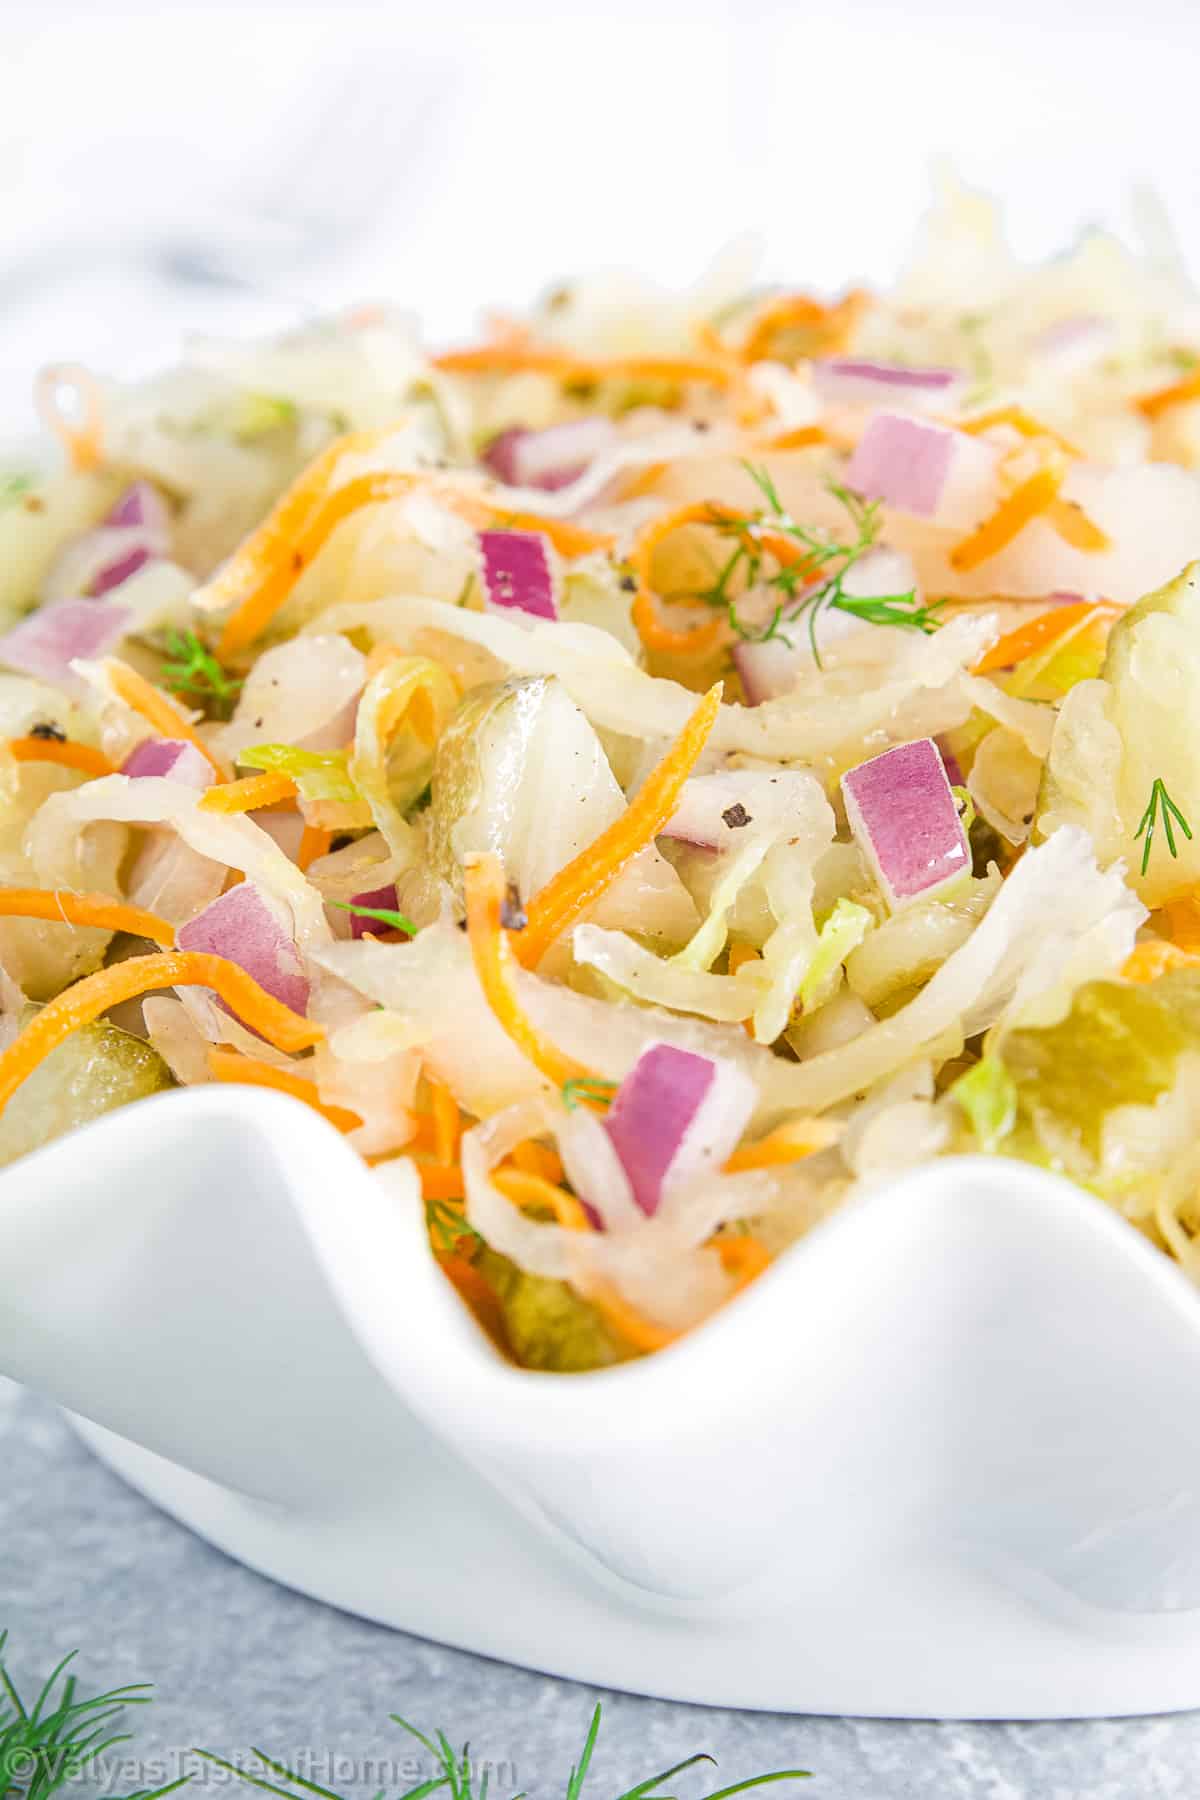 The sauerkraut salad is not just easy to prepare but also packed with fiber and low in calories.